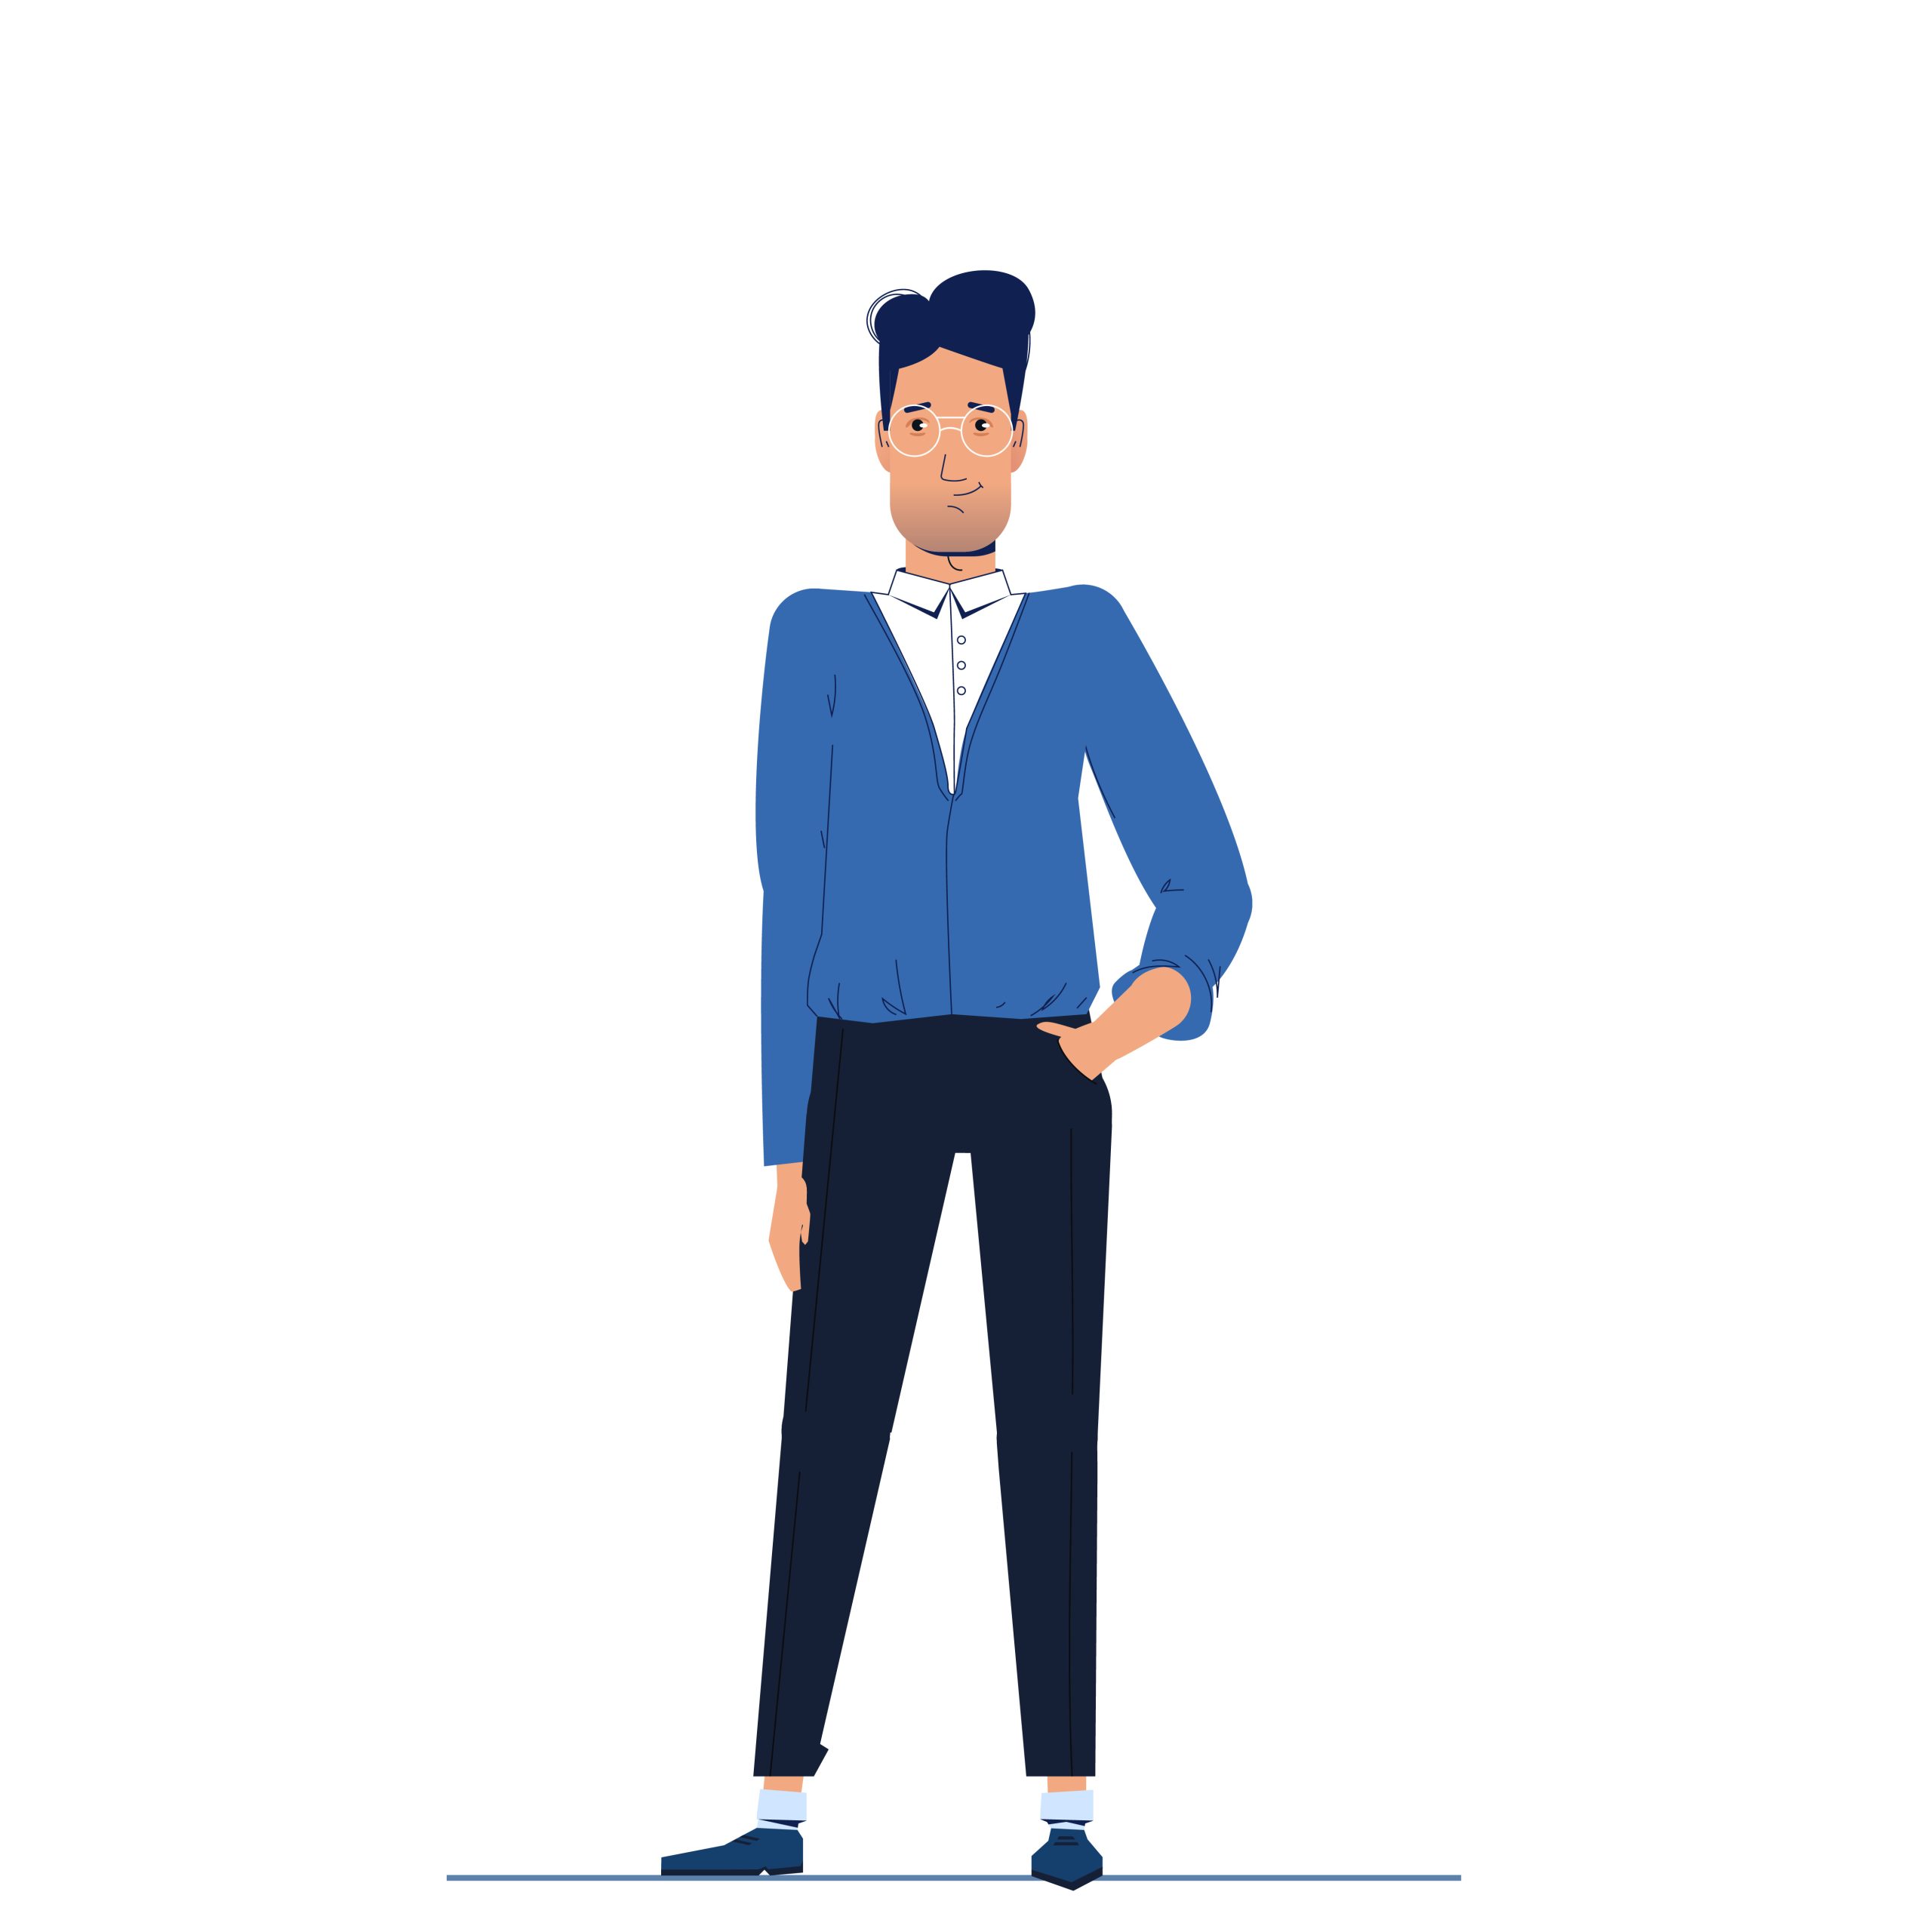 The character is a man businessman stands and looks forward. Vector cartoon illustration